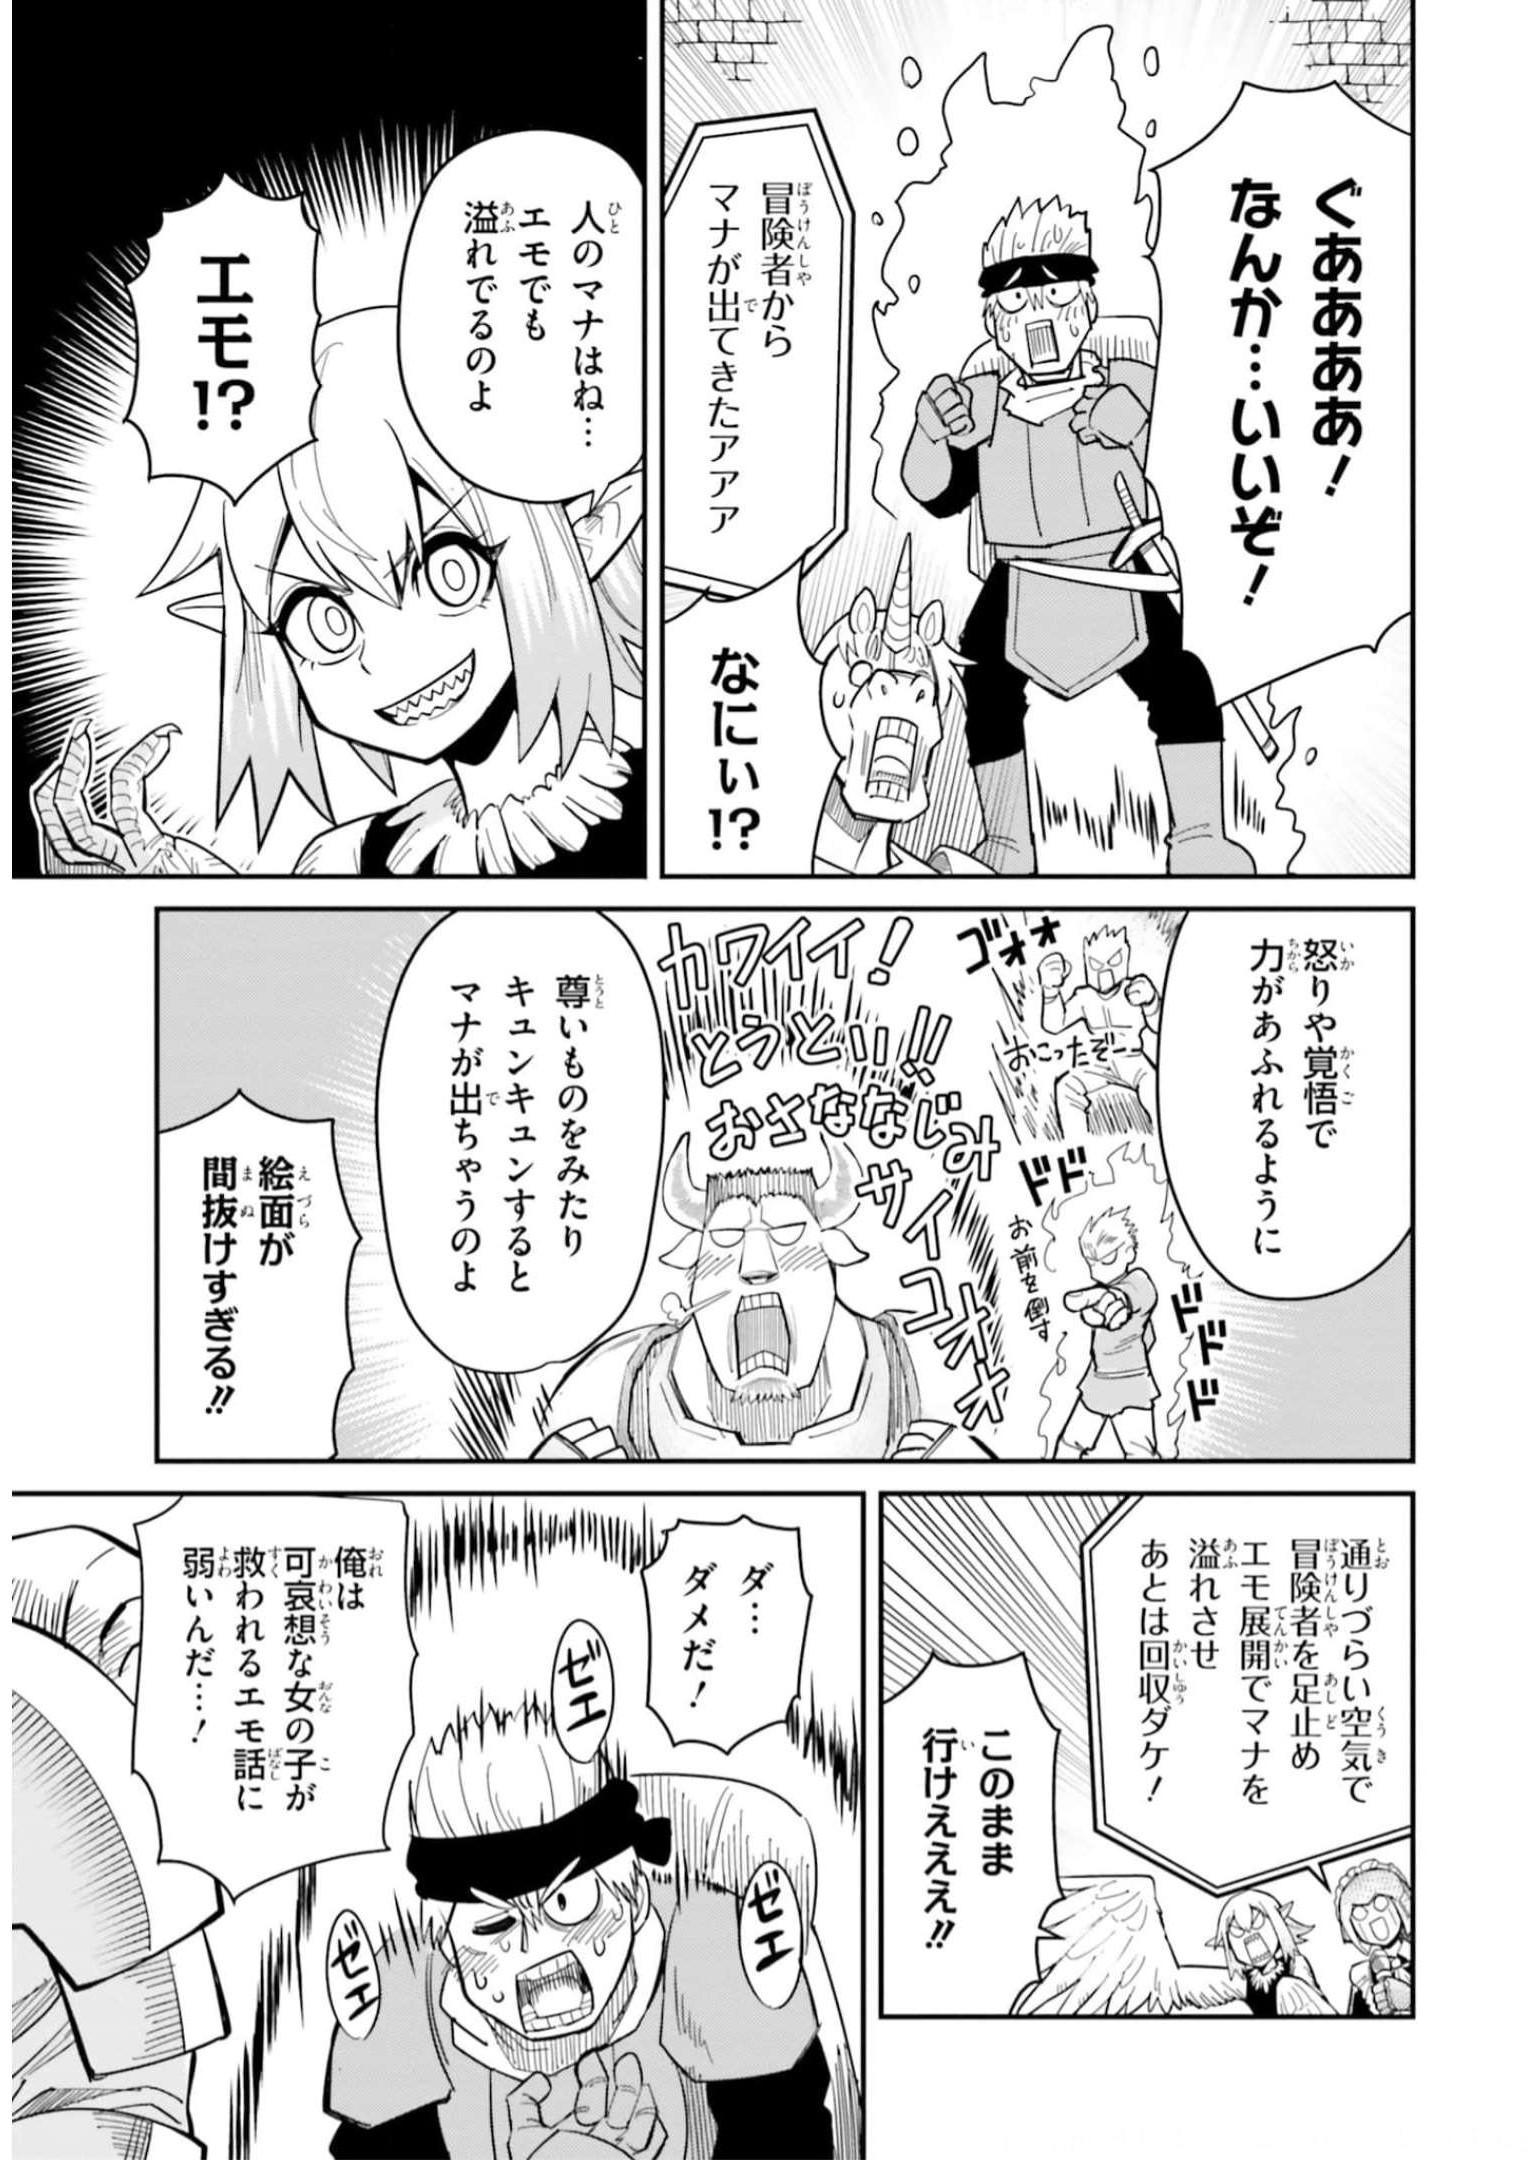 Dungeon Friends Forever Dungeon’s Childhood Friend ダンジョンの幼なじみ 第20話 - Page 15